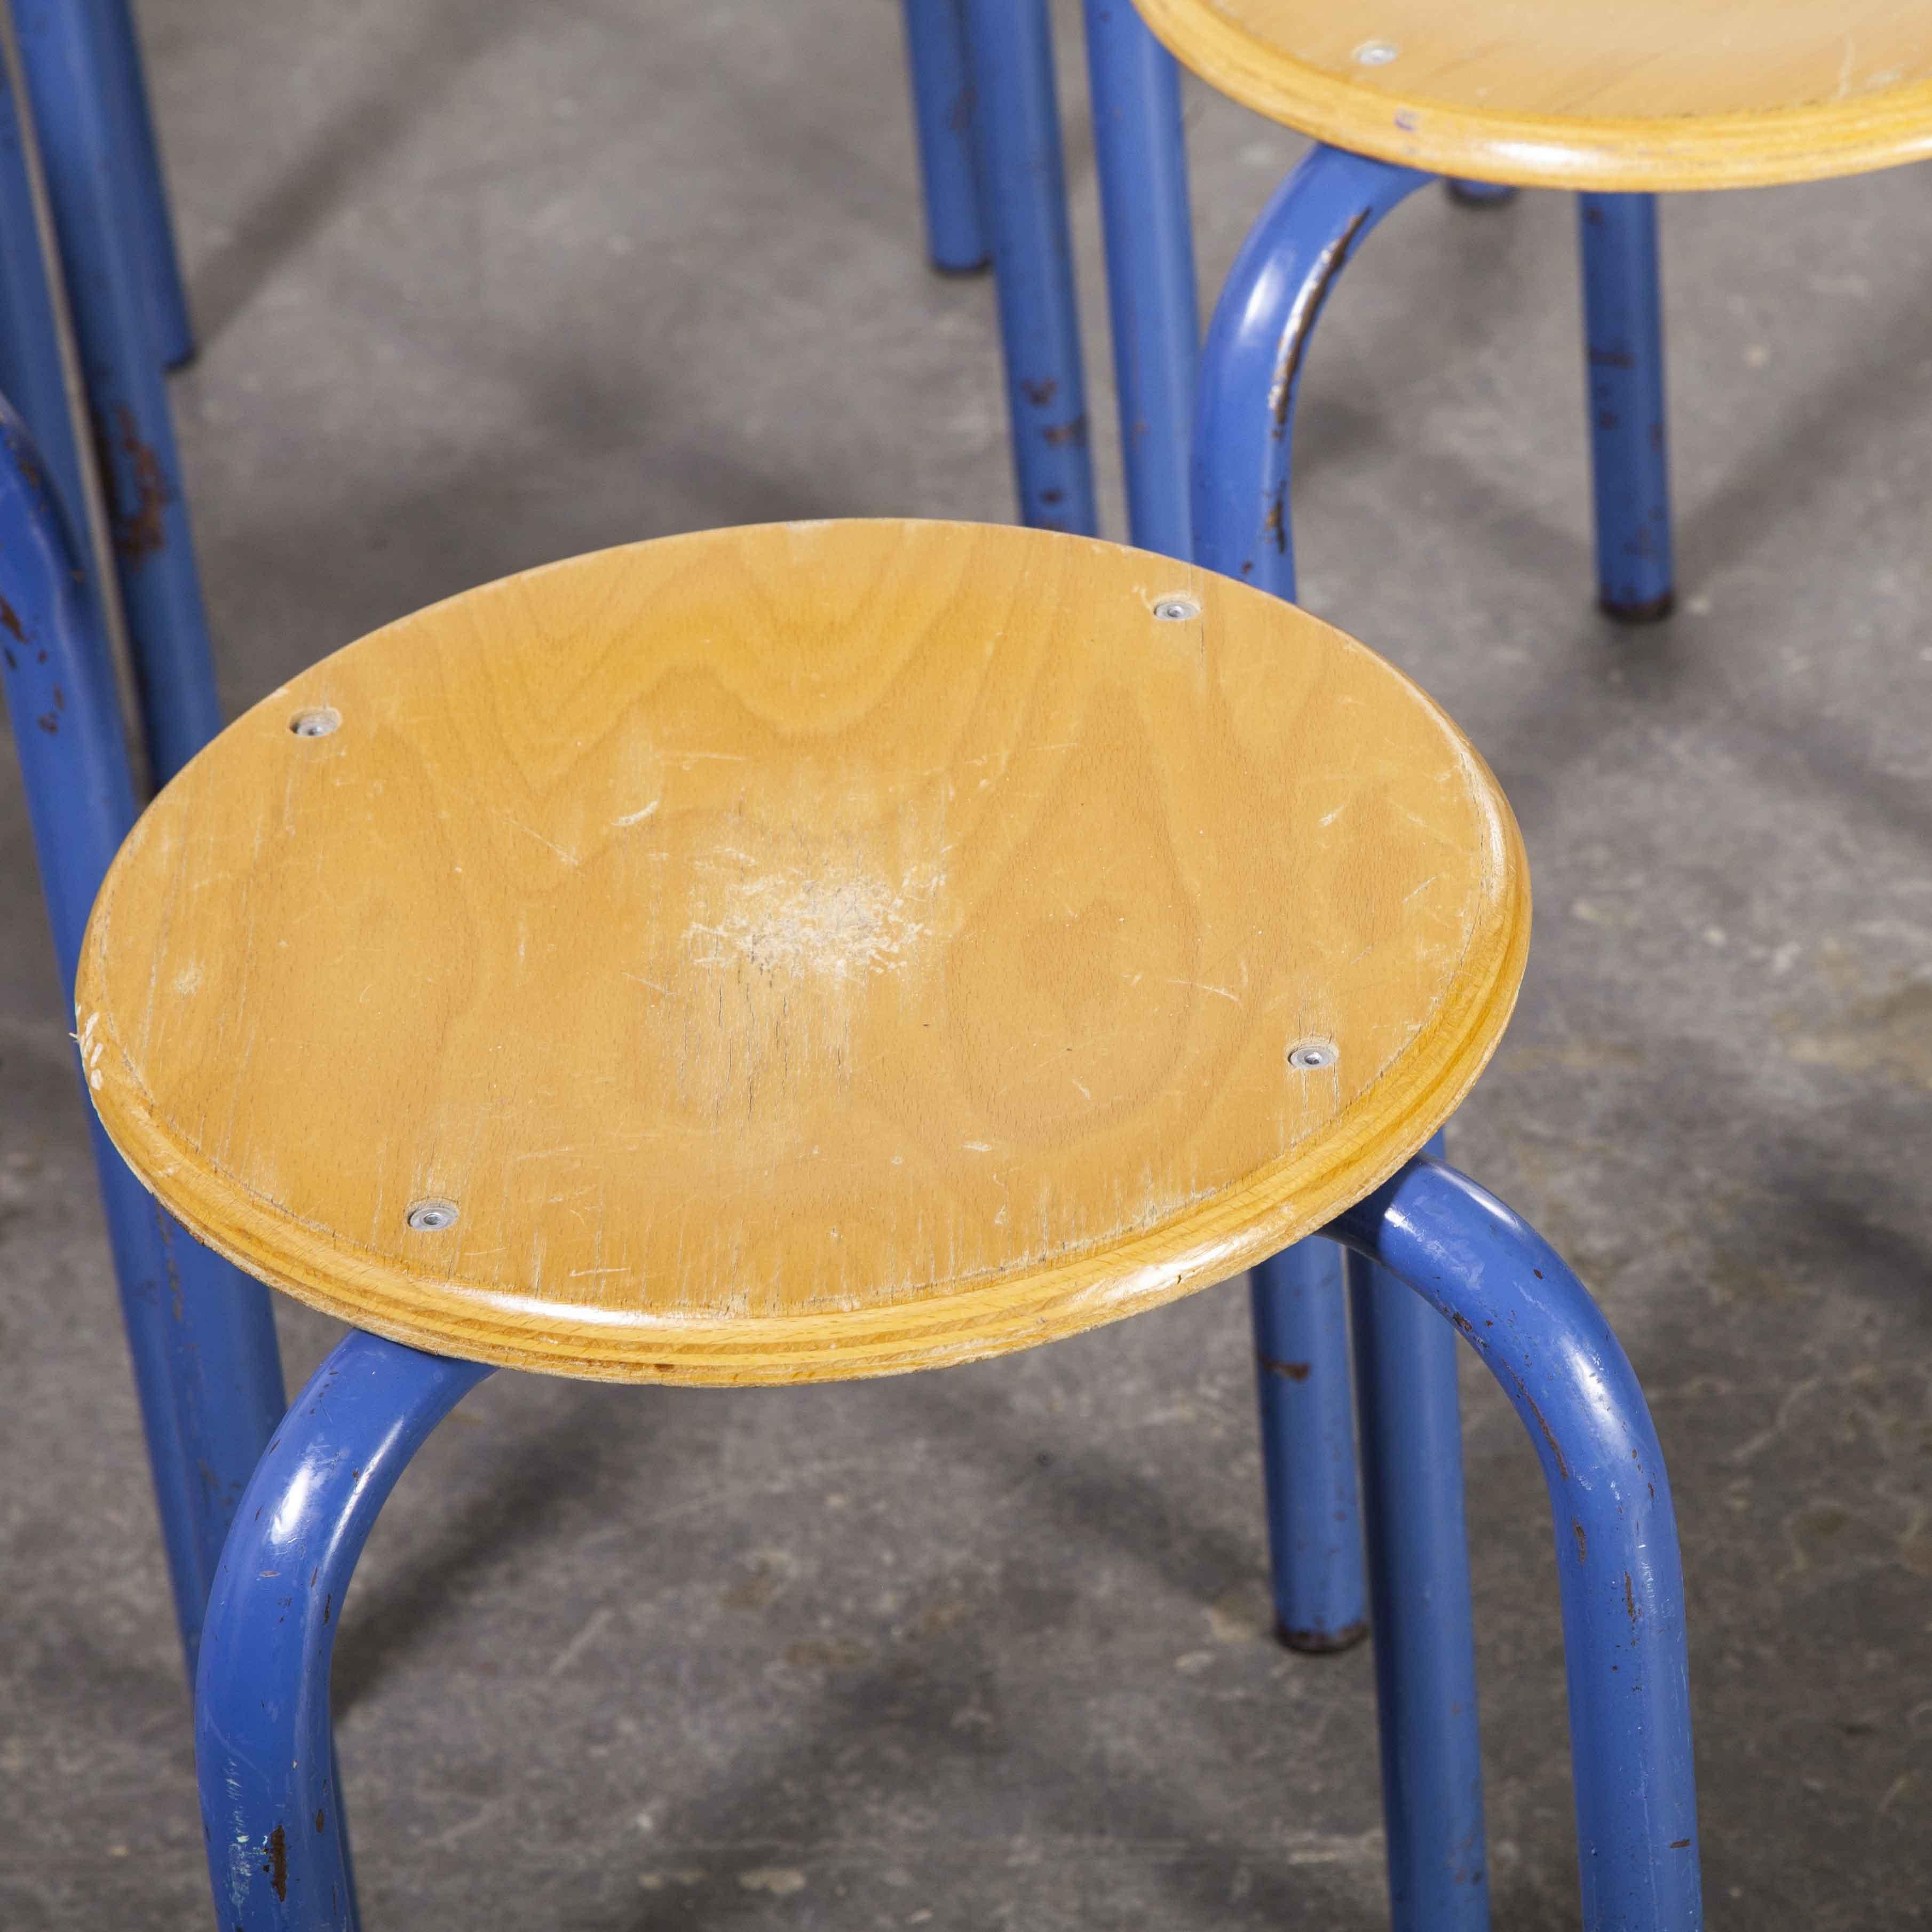 1960’s Simple French stacking school stools – Blue – Set of six

1960’s Simple French stacking school stools – Blue – Set of six. Classic French school stools, solid beech laminated tops with strong metal bases. Original stools in great condition.